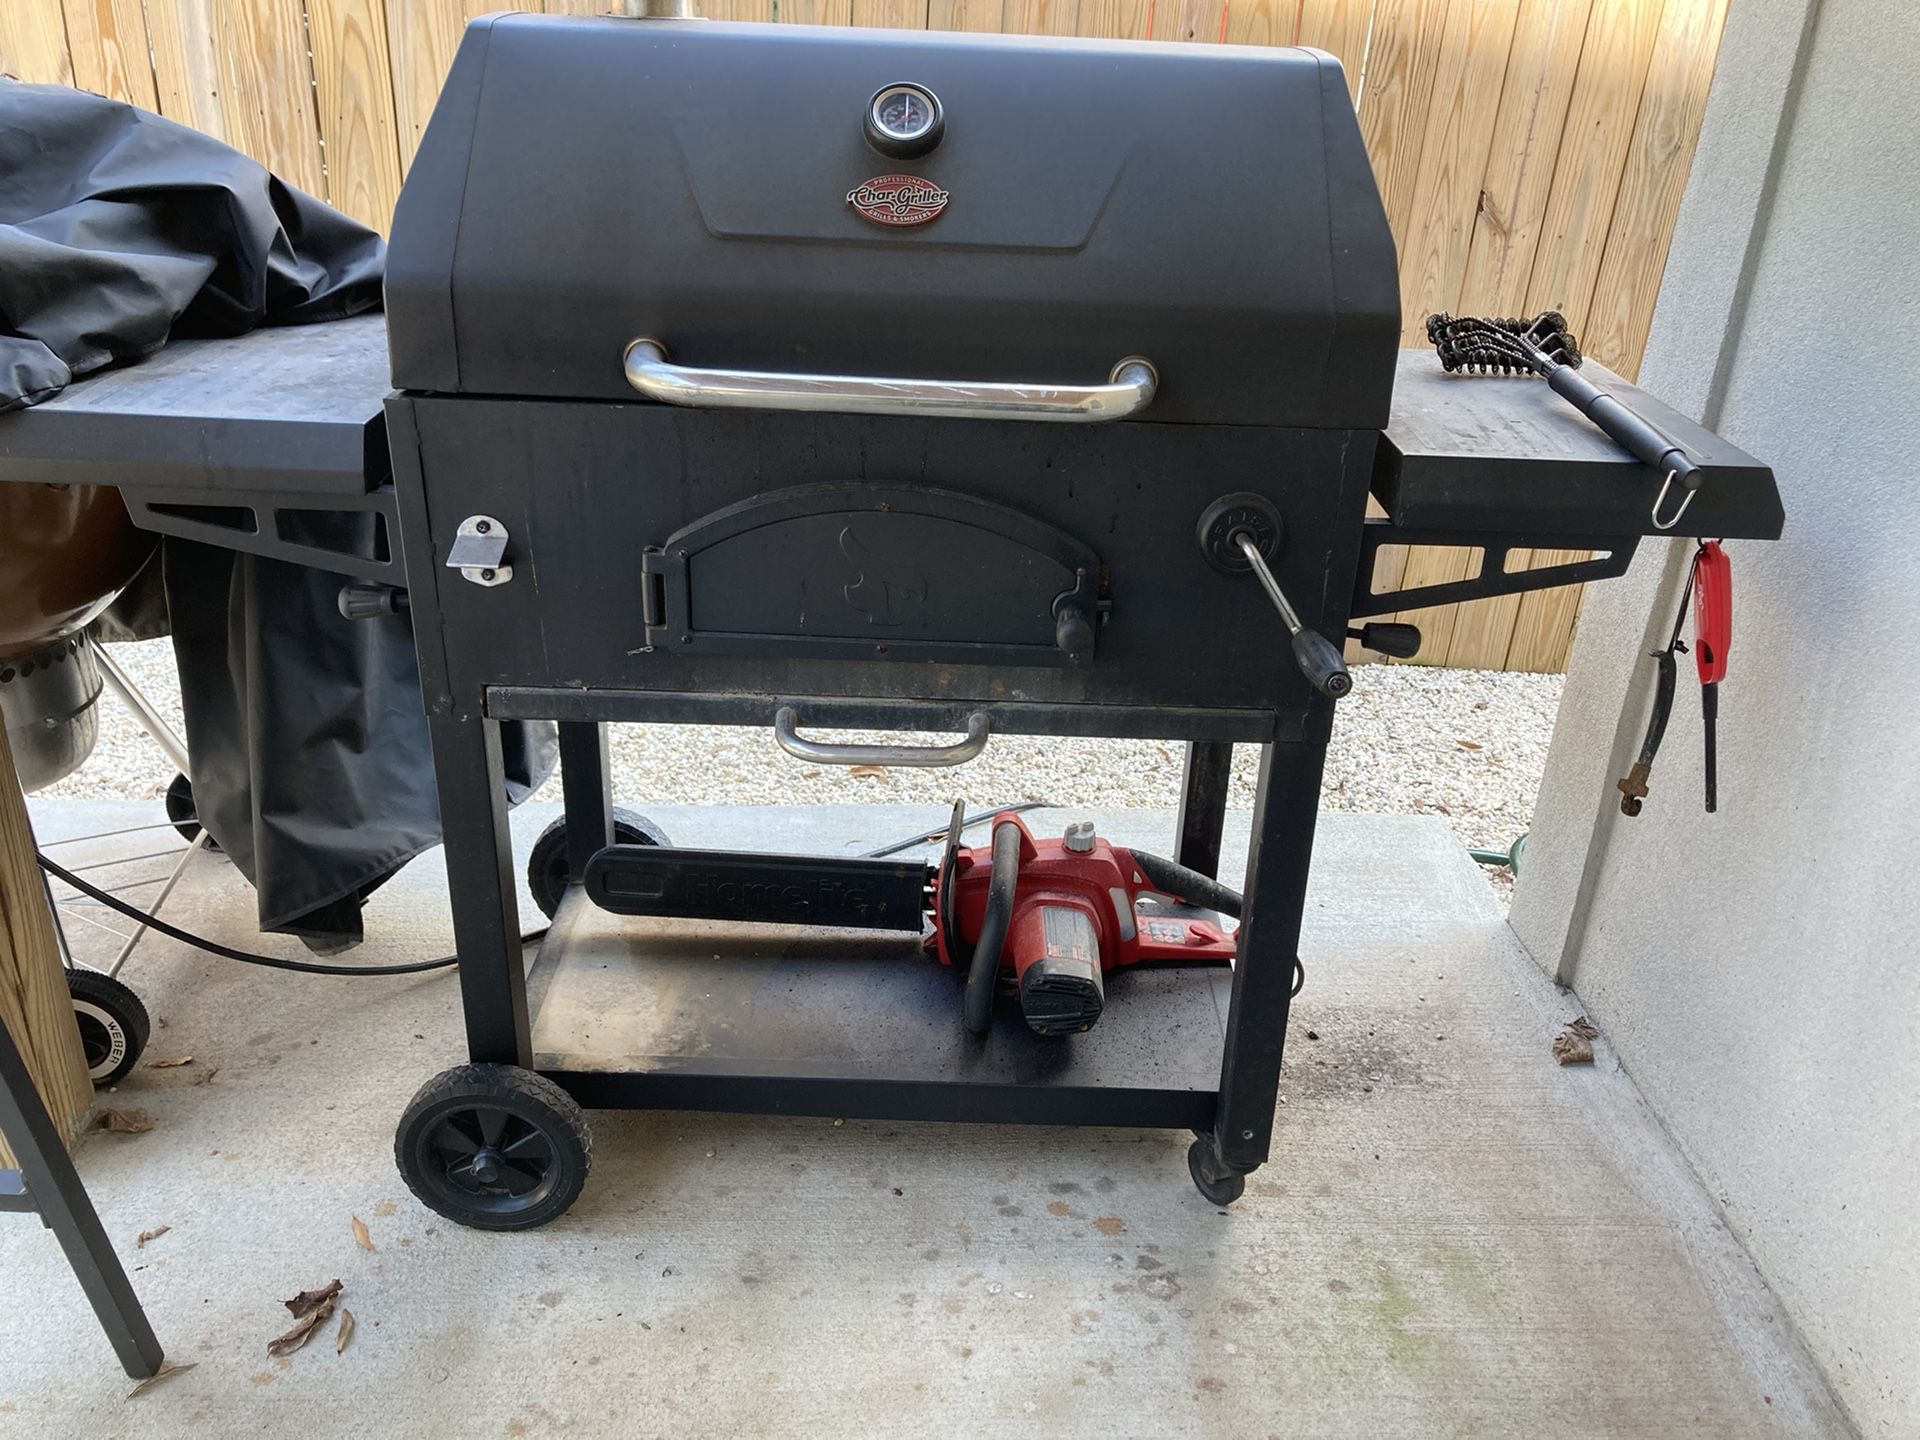 Char-griller grill